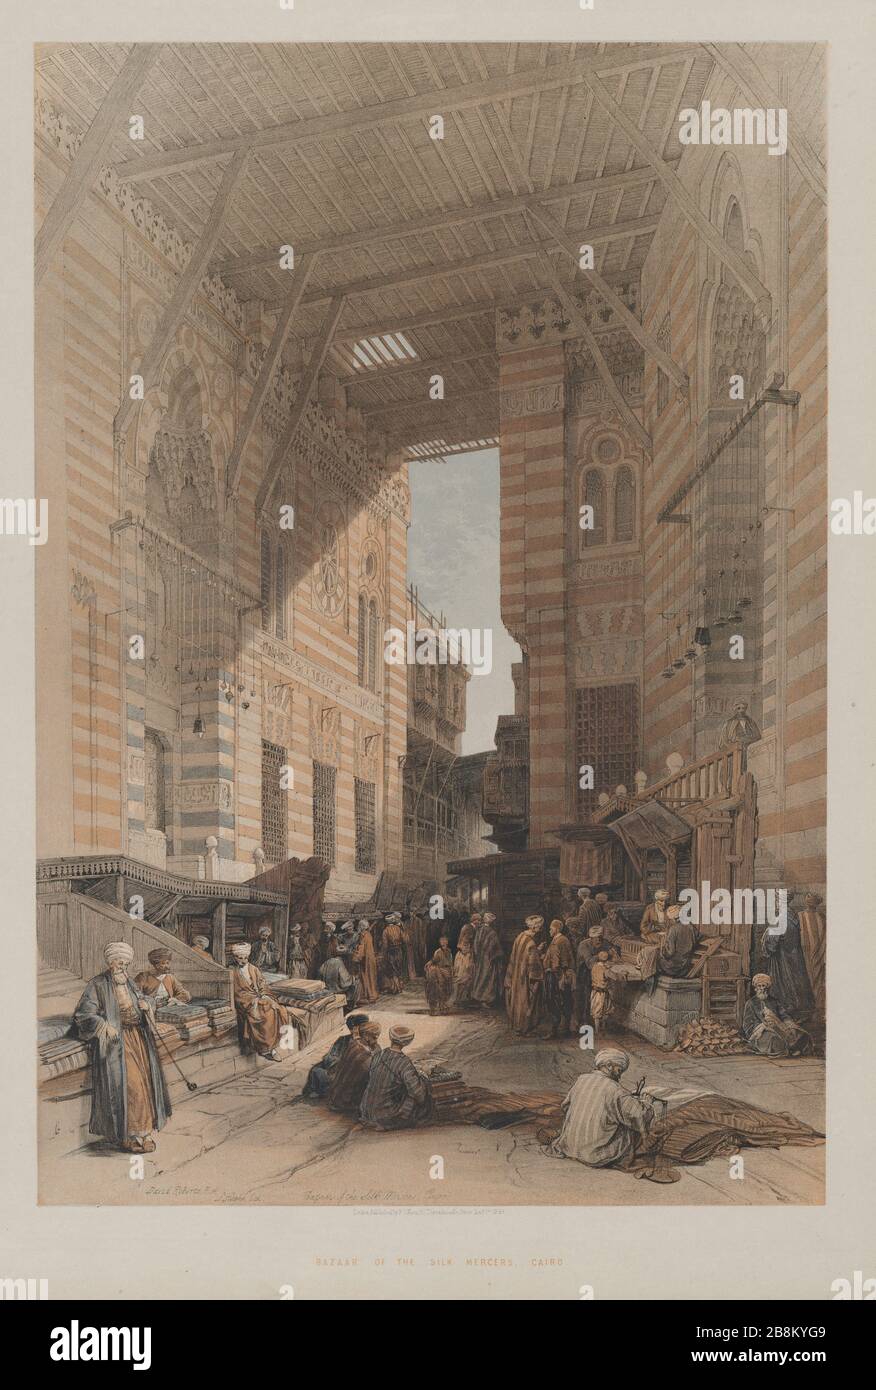 Egypt and Nubia, Volume III: Bazaar of the Silk Mercers, Cairo, 1848. Louis Haghe (British, 1806-1885), F.G.Moon, 20 Threadneedle Street, London, after David Roberts (British, 1796-1864). Color lithograph Stock Photo